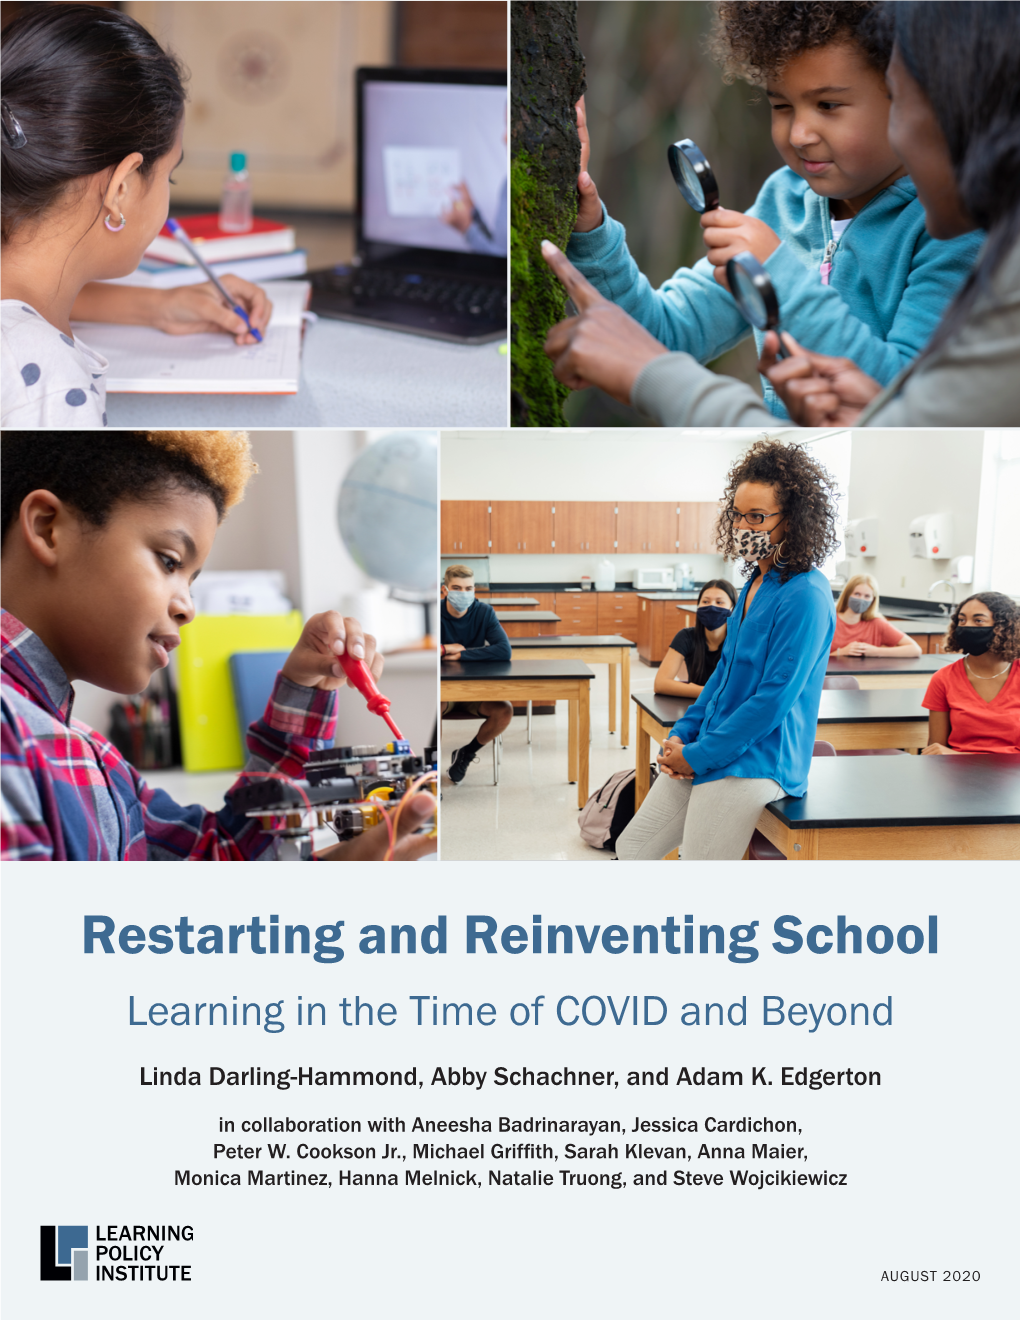 Restarting and Reinventing School: Learning in the Time of COVID and Beyond